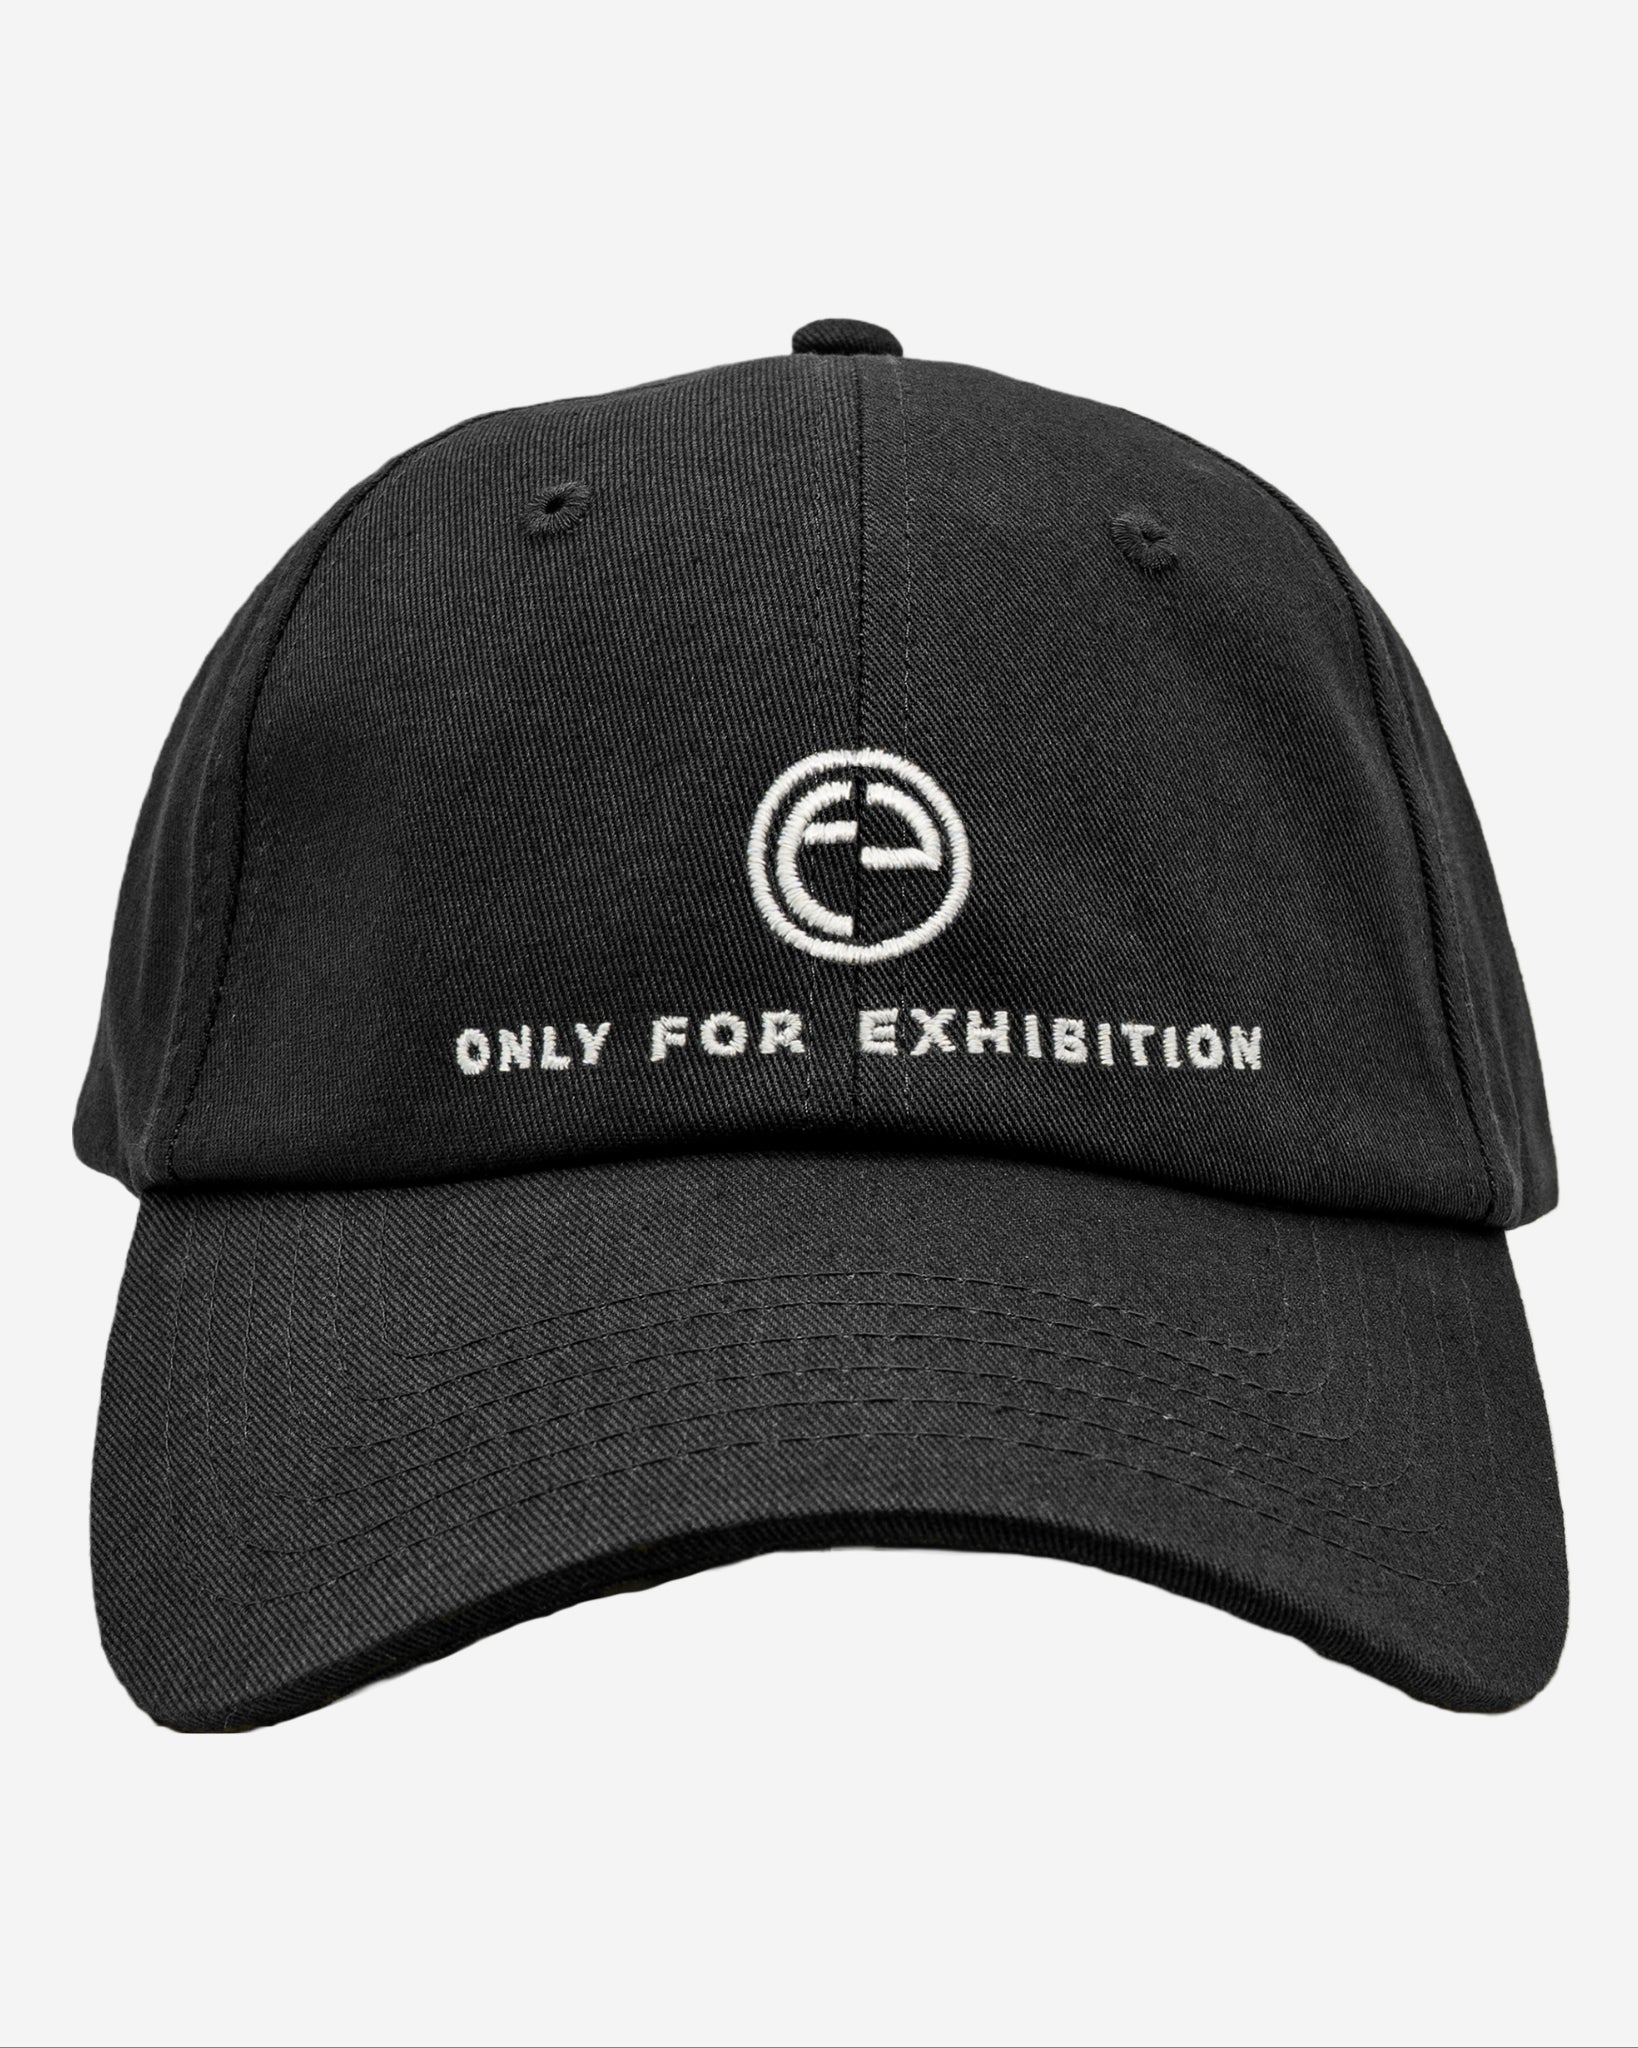 The Only For Exhibition Baseball Cap – OnlyForExhibition